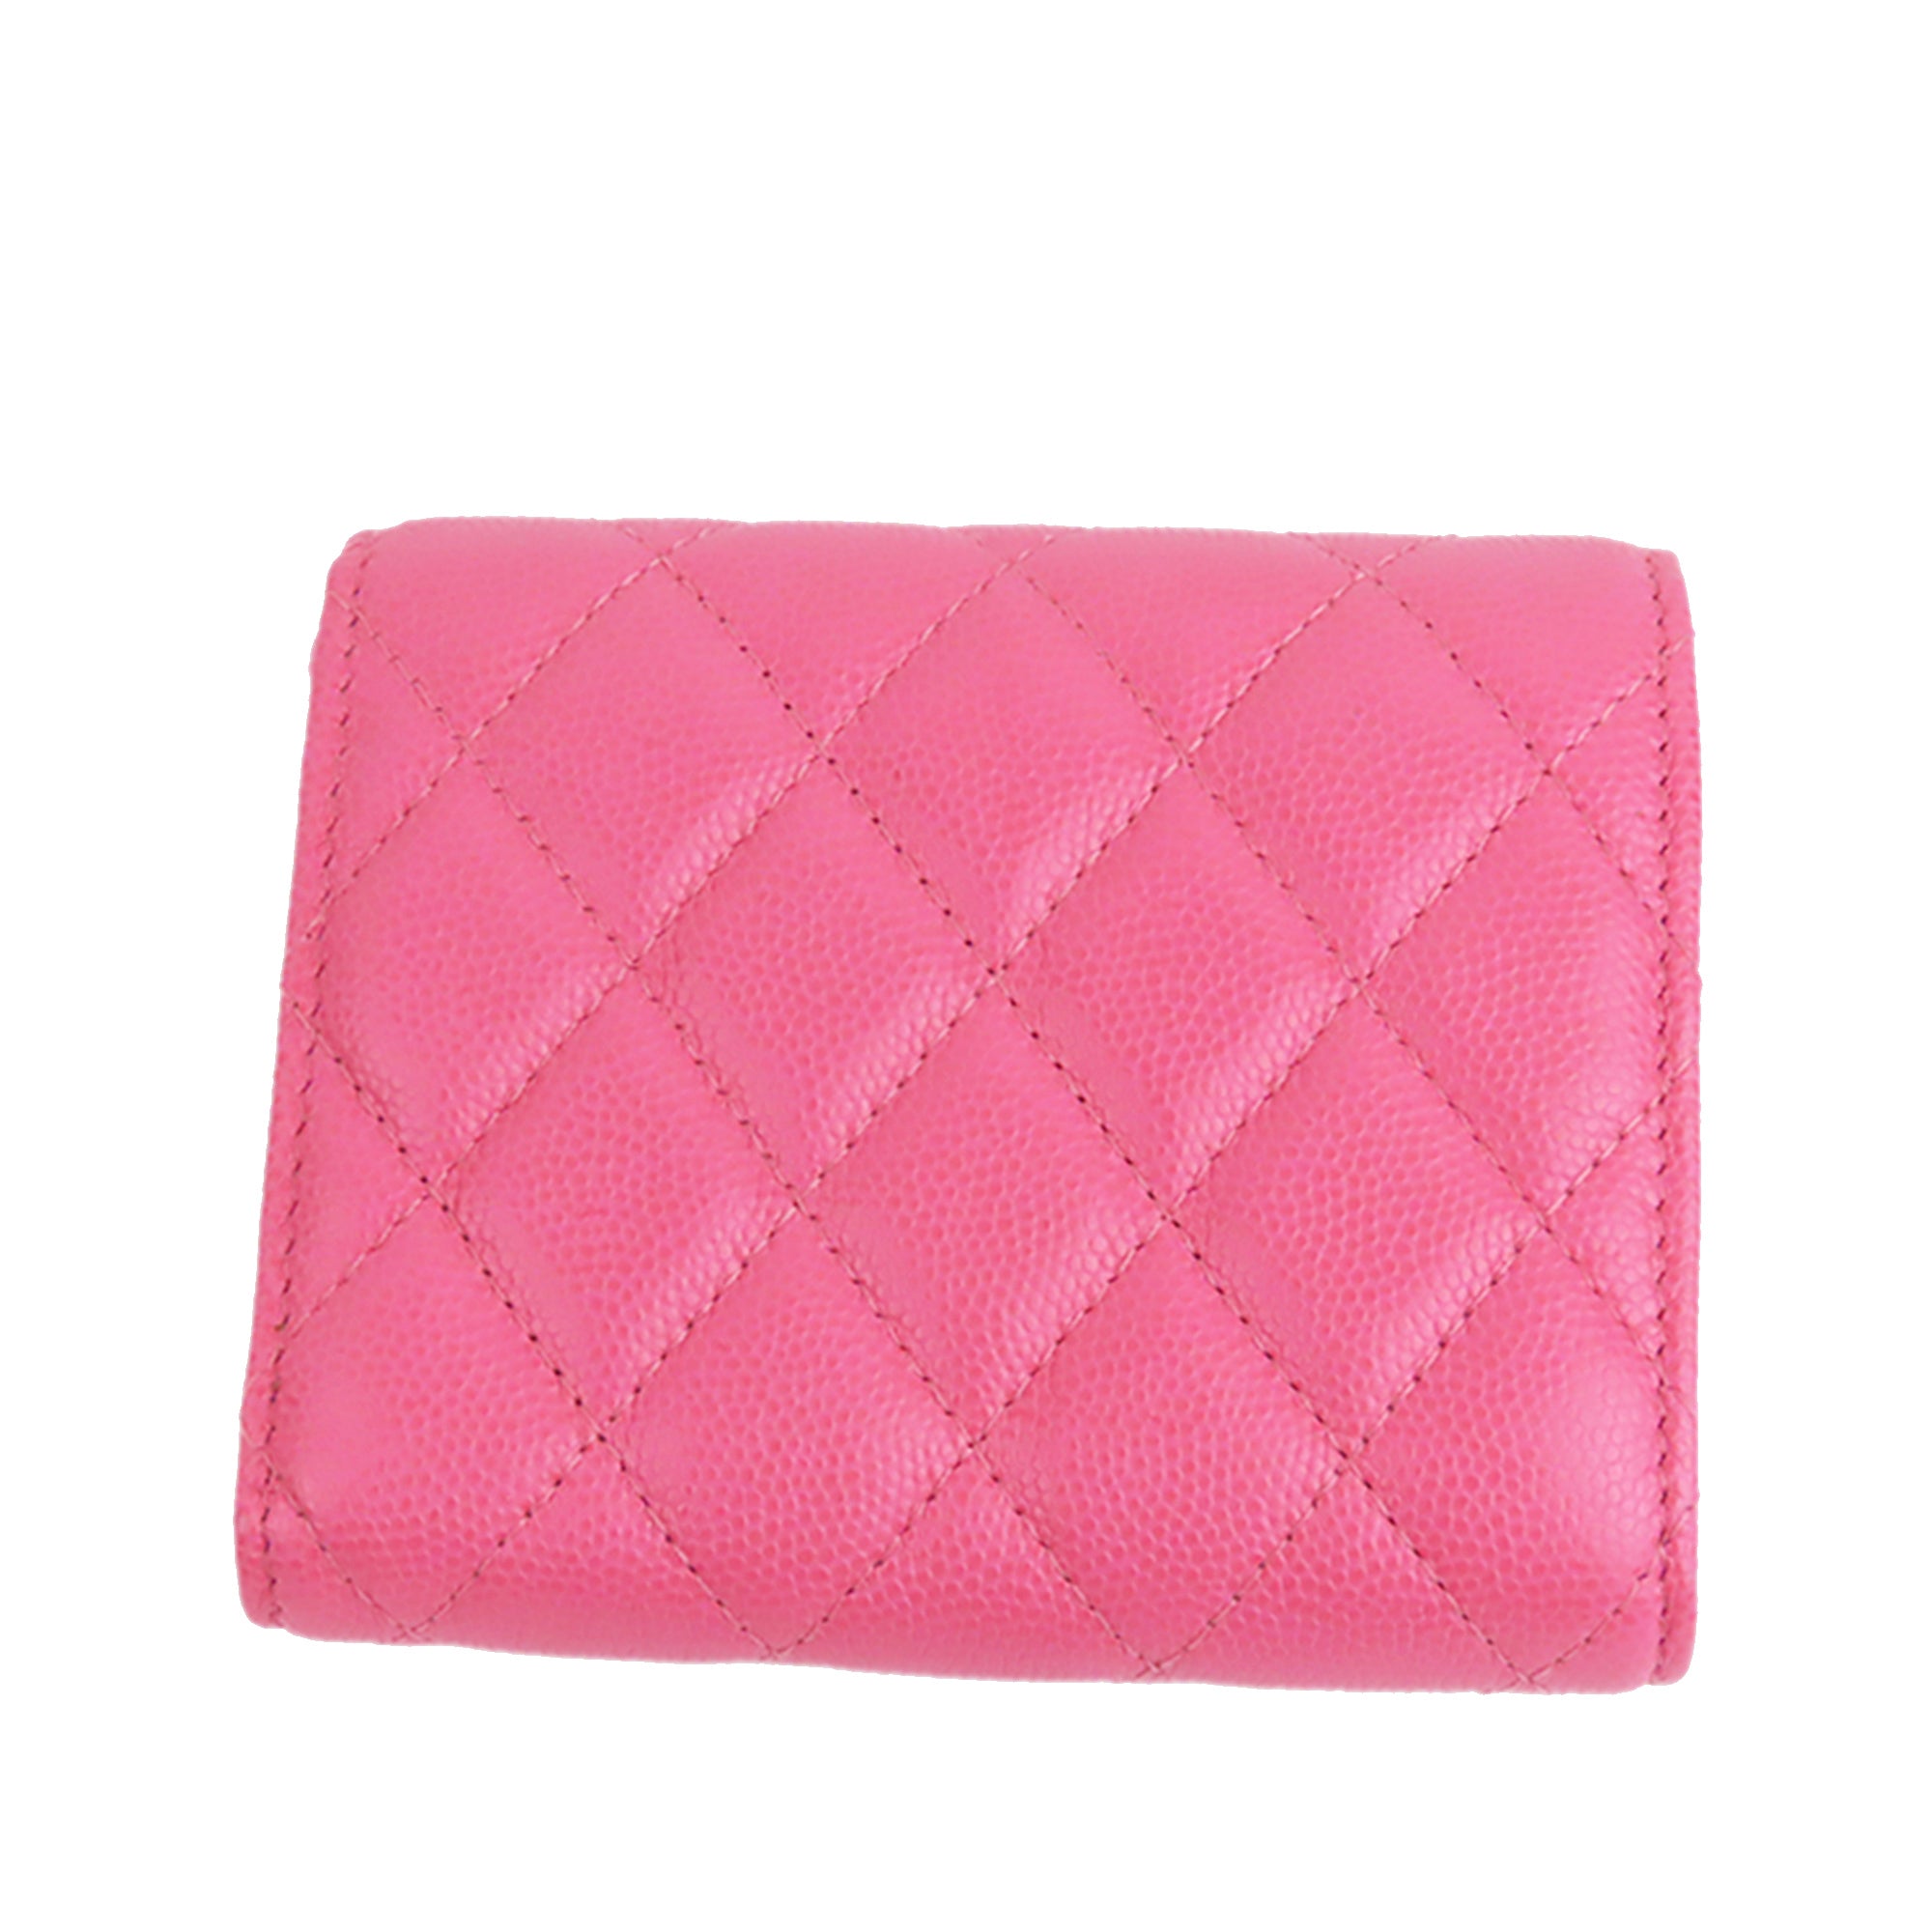 Pink Chanel CC Caviar Leather Wallet, Classic Chanel scarf featuring interlocking  CC and Chanel print throughout